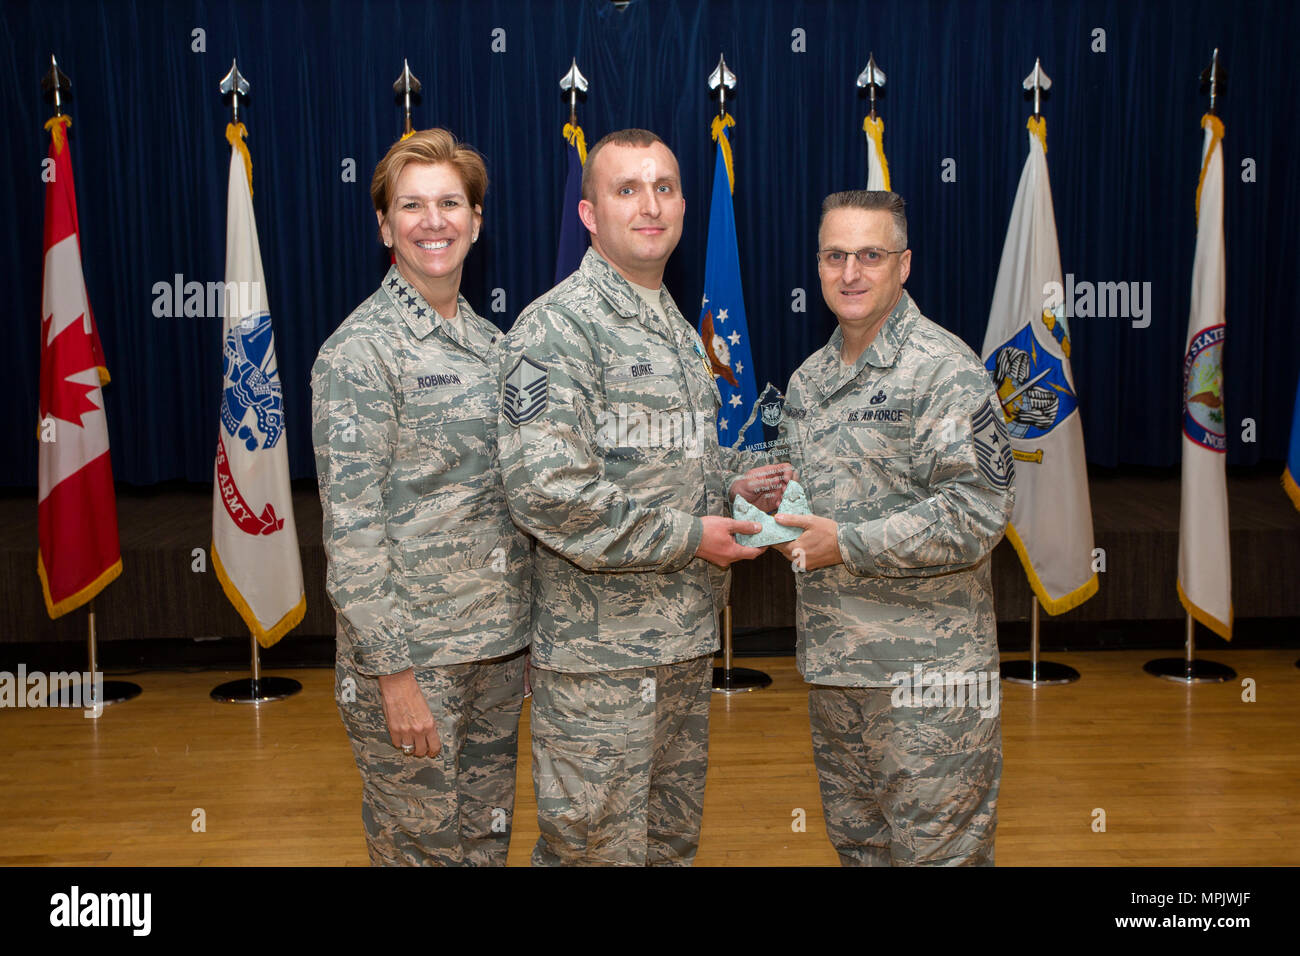 NORAD ( North American Aerosapce Defense Command) Commander Lori Robinson and Chief Master Sgt. Harold Hutchinson, right, NORAD's Senior Enlisted Leader present the NORAD Senior Noncomisioned Officer of the Year award to Master Sgt James Burke, a member of the 224th Air Defense Group of the New York Air National Guard, on March 14, 2017 during a ceremony at NORAD headquarters on Colorado Springs, CO. The 224th Air Defense Group is manned by New York Air National Guard Airmen and is a component of the Easter Air Defense Sector which coordinates air defense for the United States east of the Miss Stock Photo